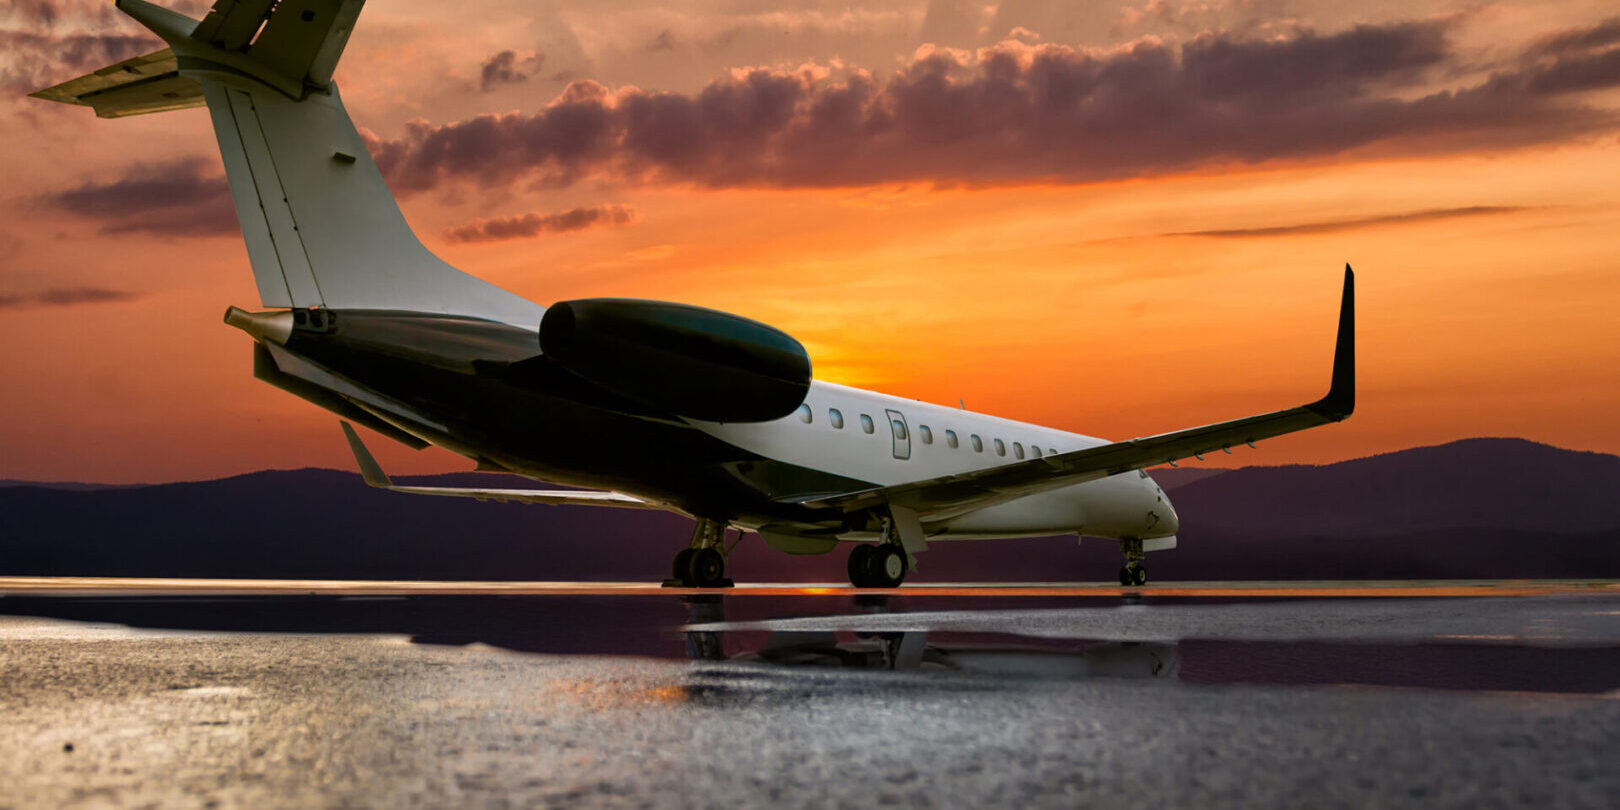 Corporate jet plane on the background of a picturesque sunset on the airport apron